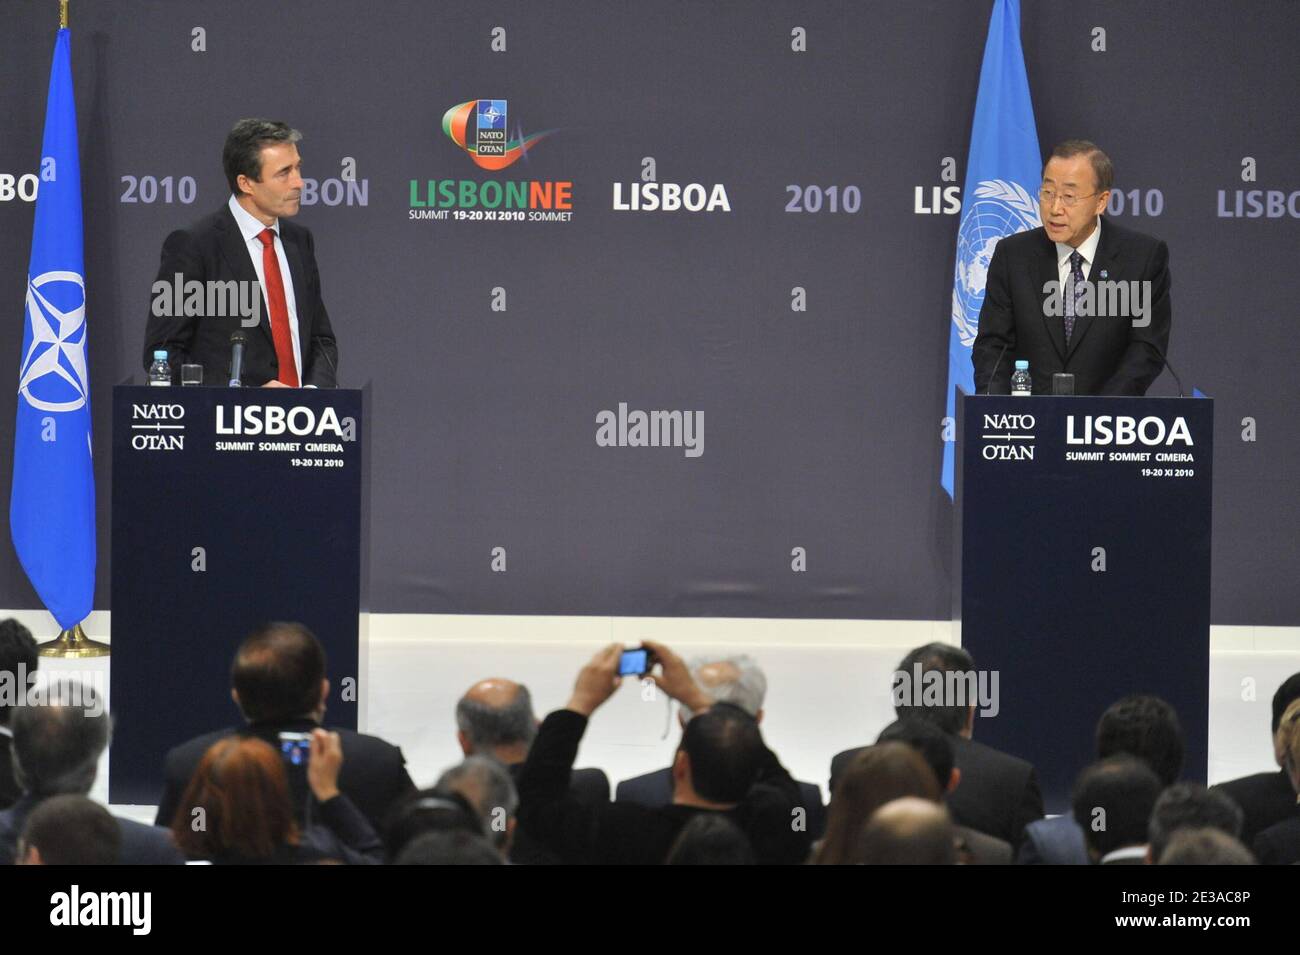 NATO Secretary General Anders Fogh Rasmussen (R) and UN Secretary-General Ban Ki-moon (R) with Afghanistan's President Hamid Karzai (unseen) attend the Joint Press Conference during NATO Summit in Lisbon, Portugal, on November 20, 2010. Hand out Photo by Nids/NATO Media Library/ABACAPRESS.COM Stock Photo